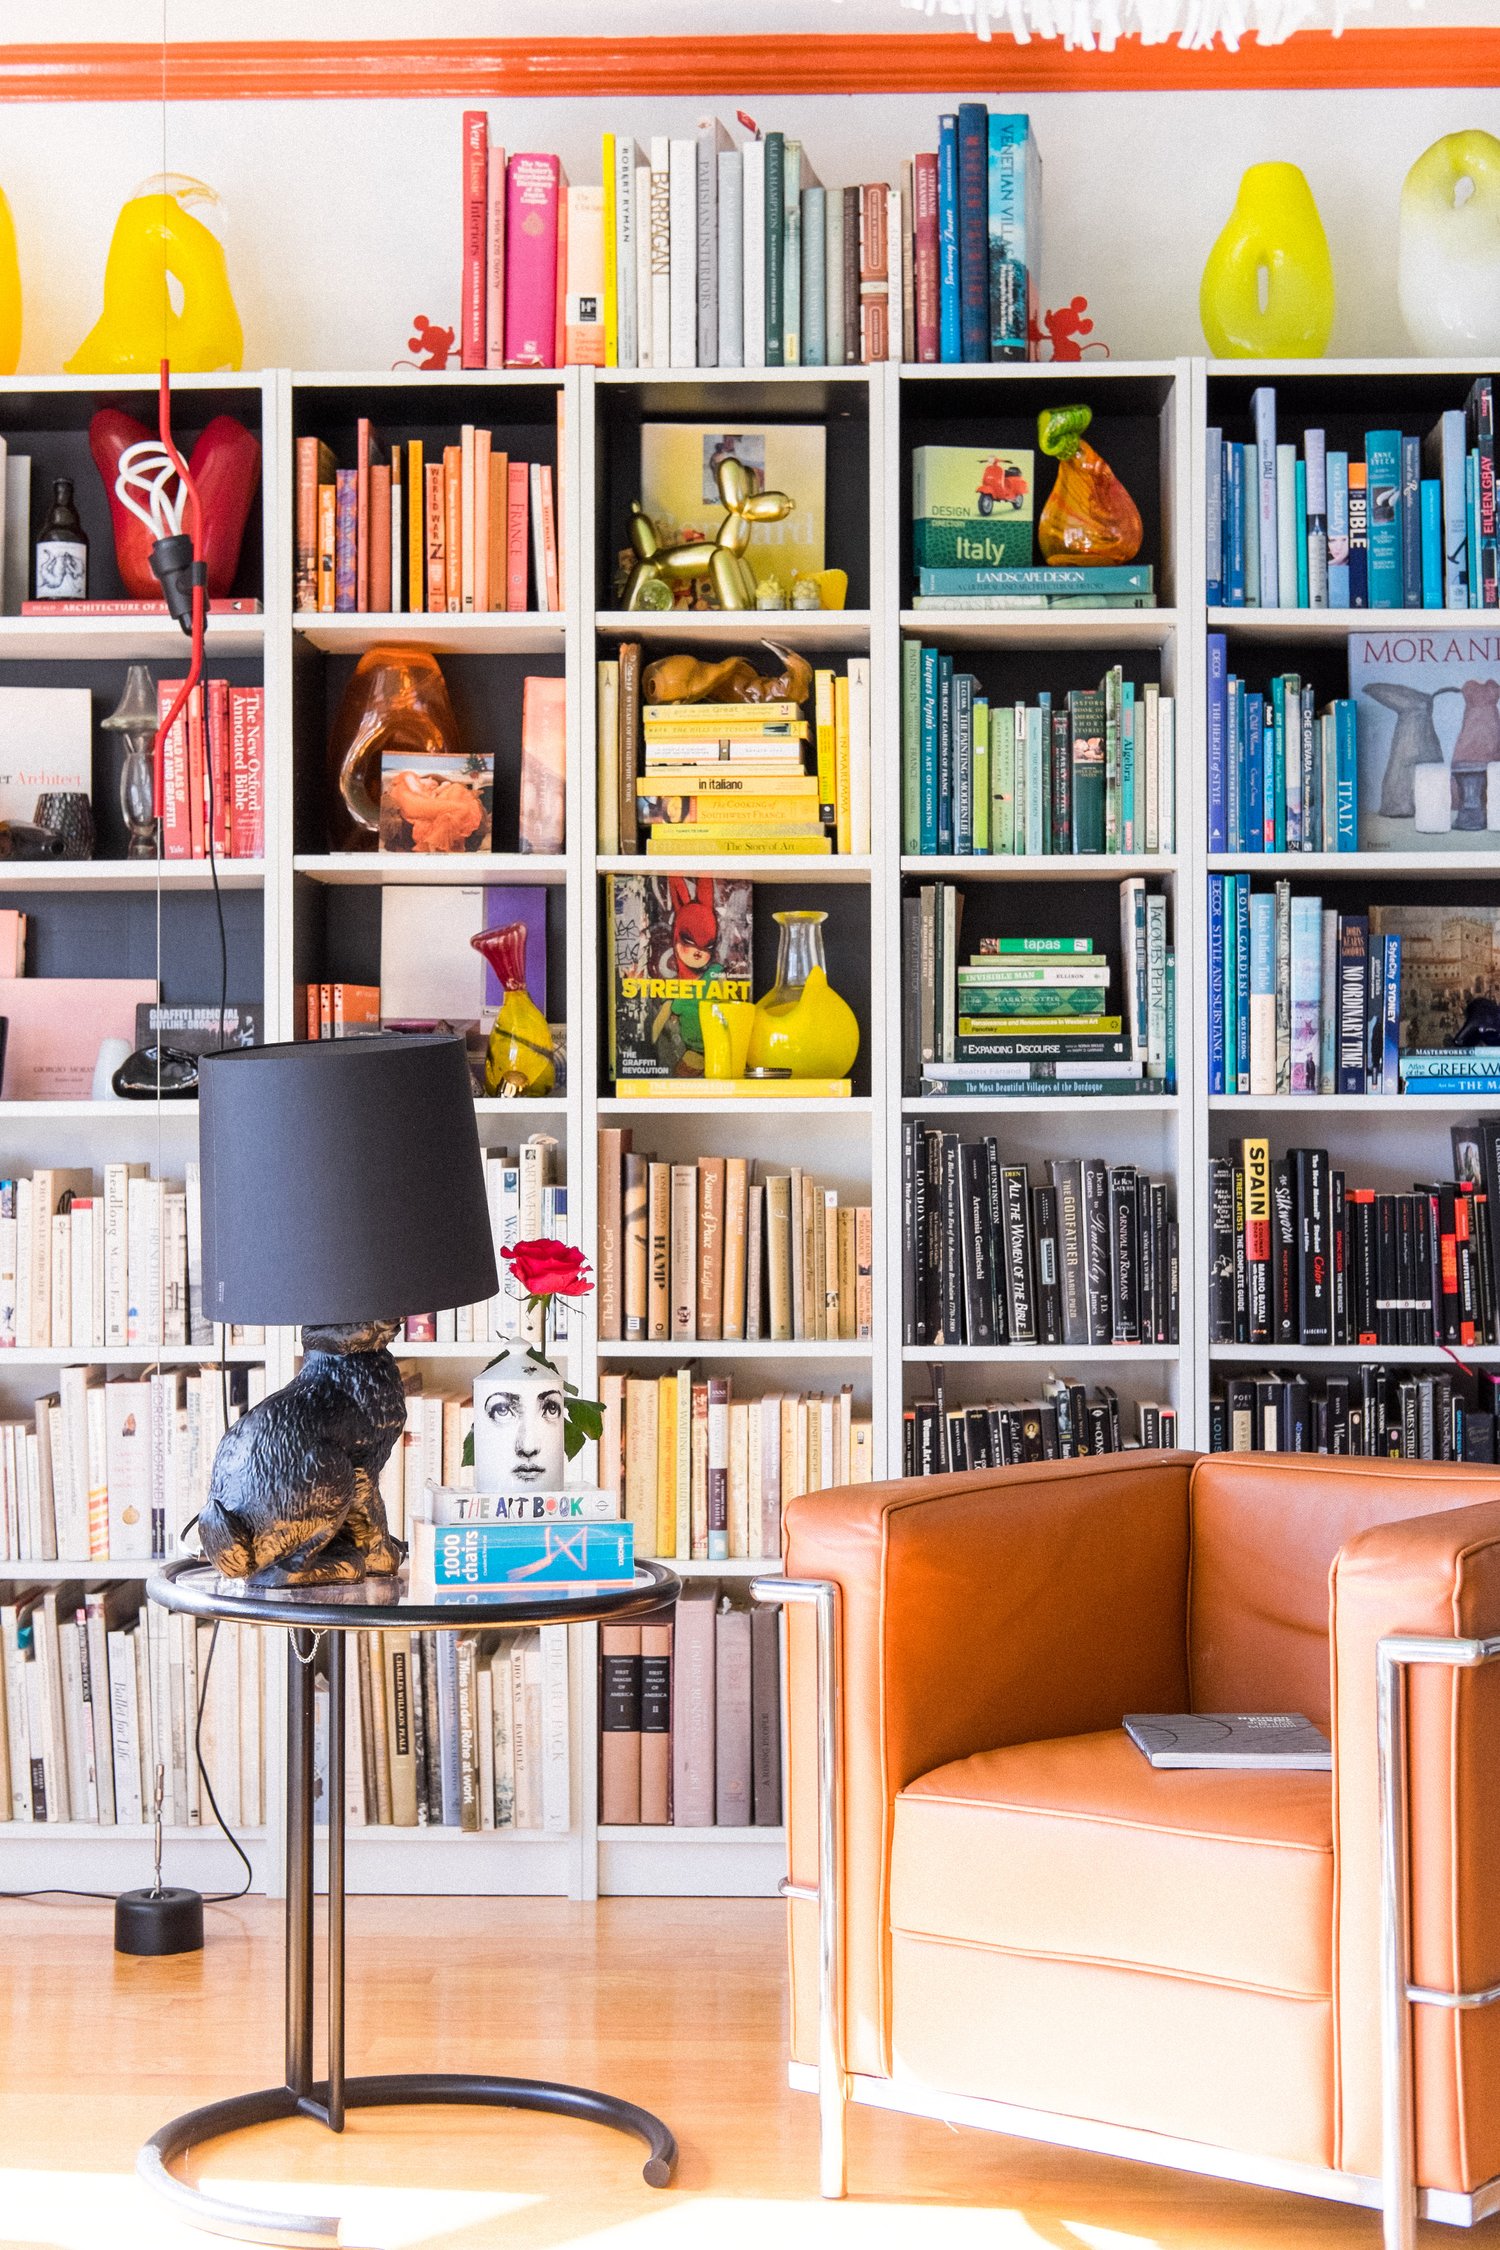 The image shows a colorful bookshelf organized by book color, with various decorative items. In front of the shelf is a brown leather armchair and a side table with books and a lamp.